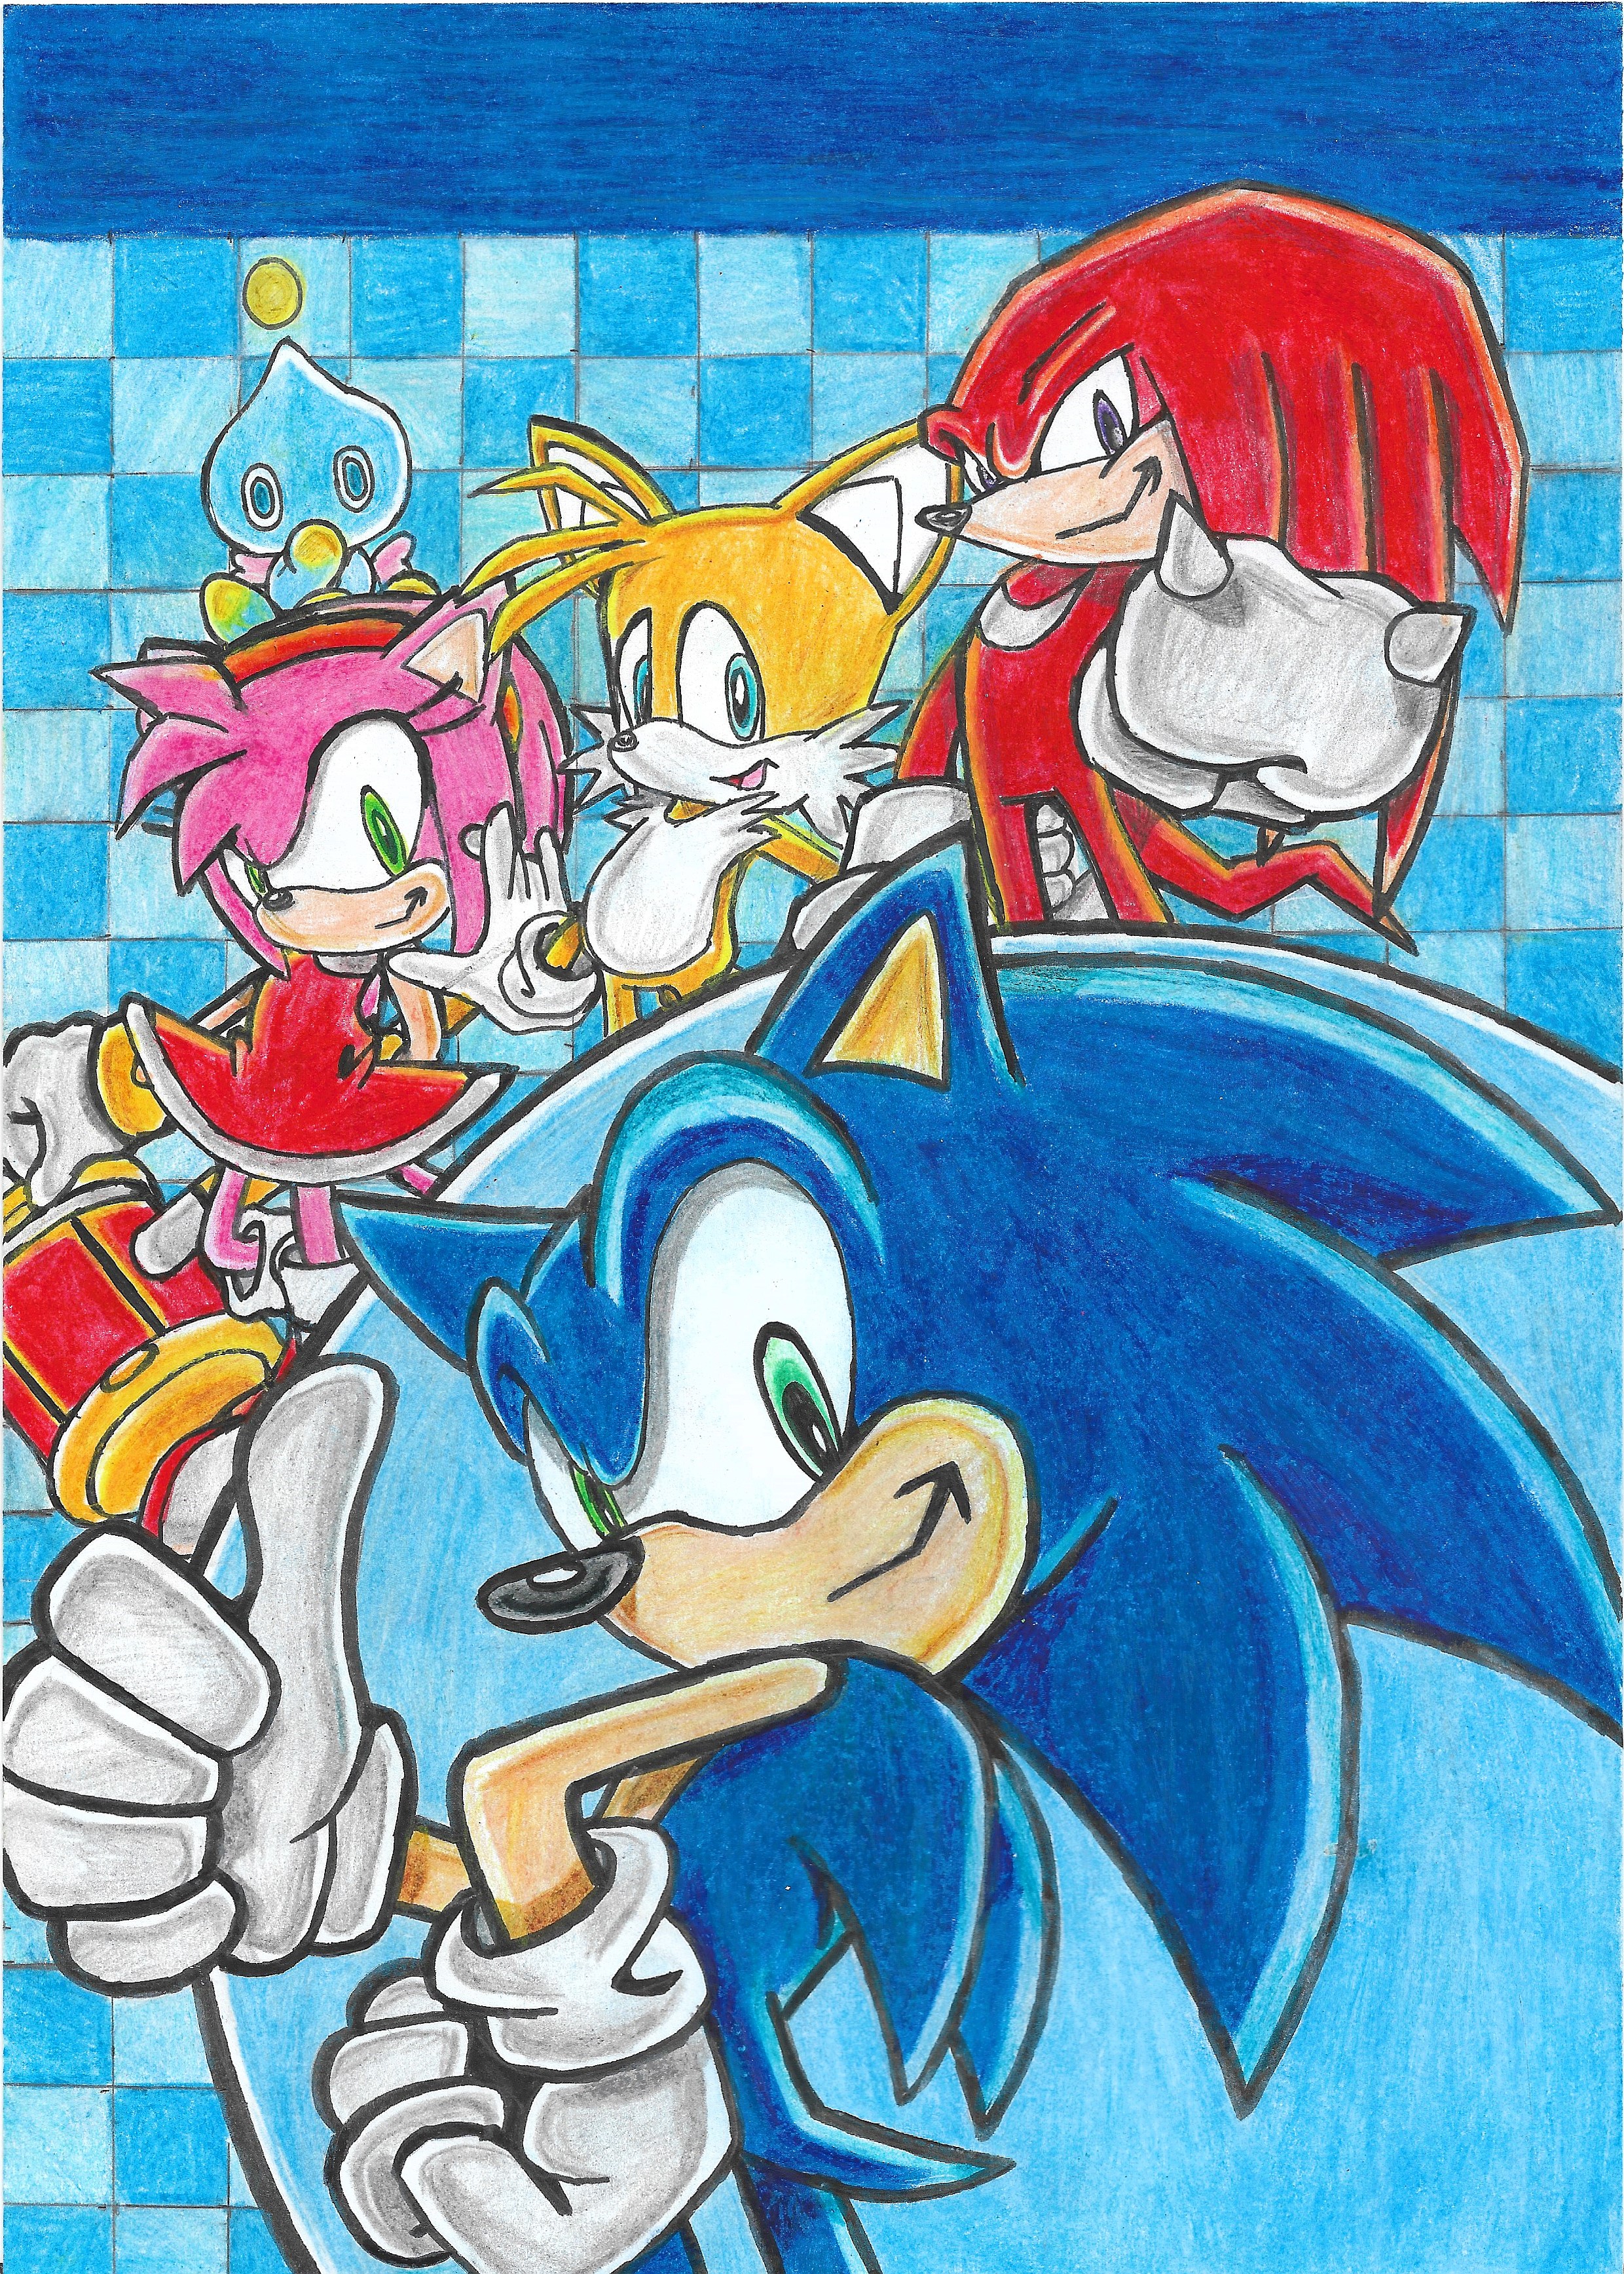 249746 - safe, artist:lucia88956289, classic sonic, knuckles the echidna  (sonic), miles tails prower (sonic), sonic the hedgehog (sonic), sega,  sonic the hedgehog (series), classic amy, classic knuckles, classic tails,  hyper knuckles, super